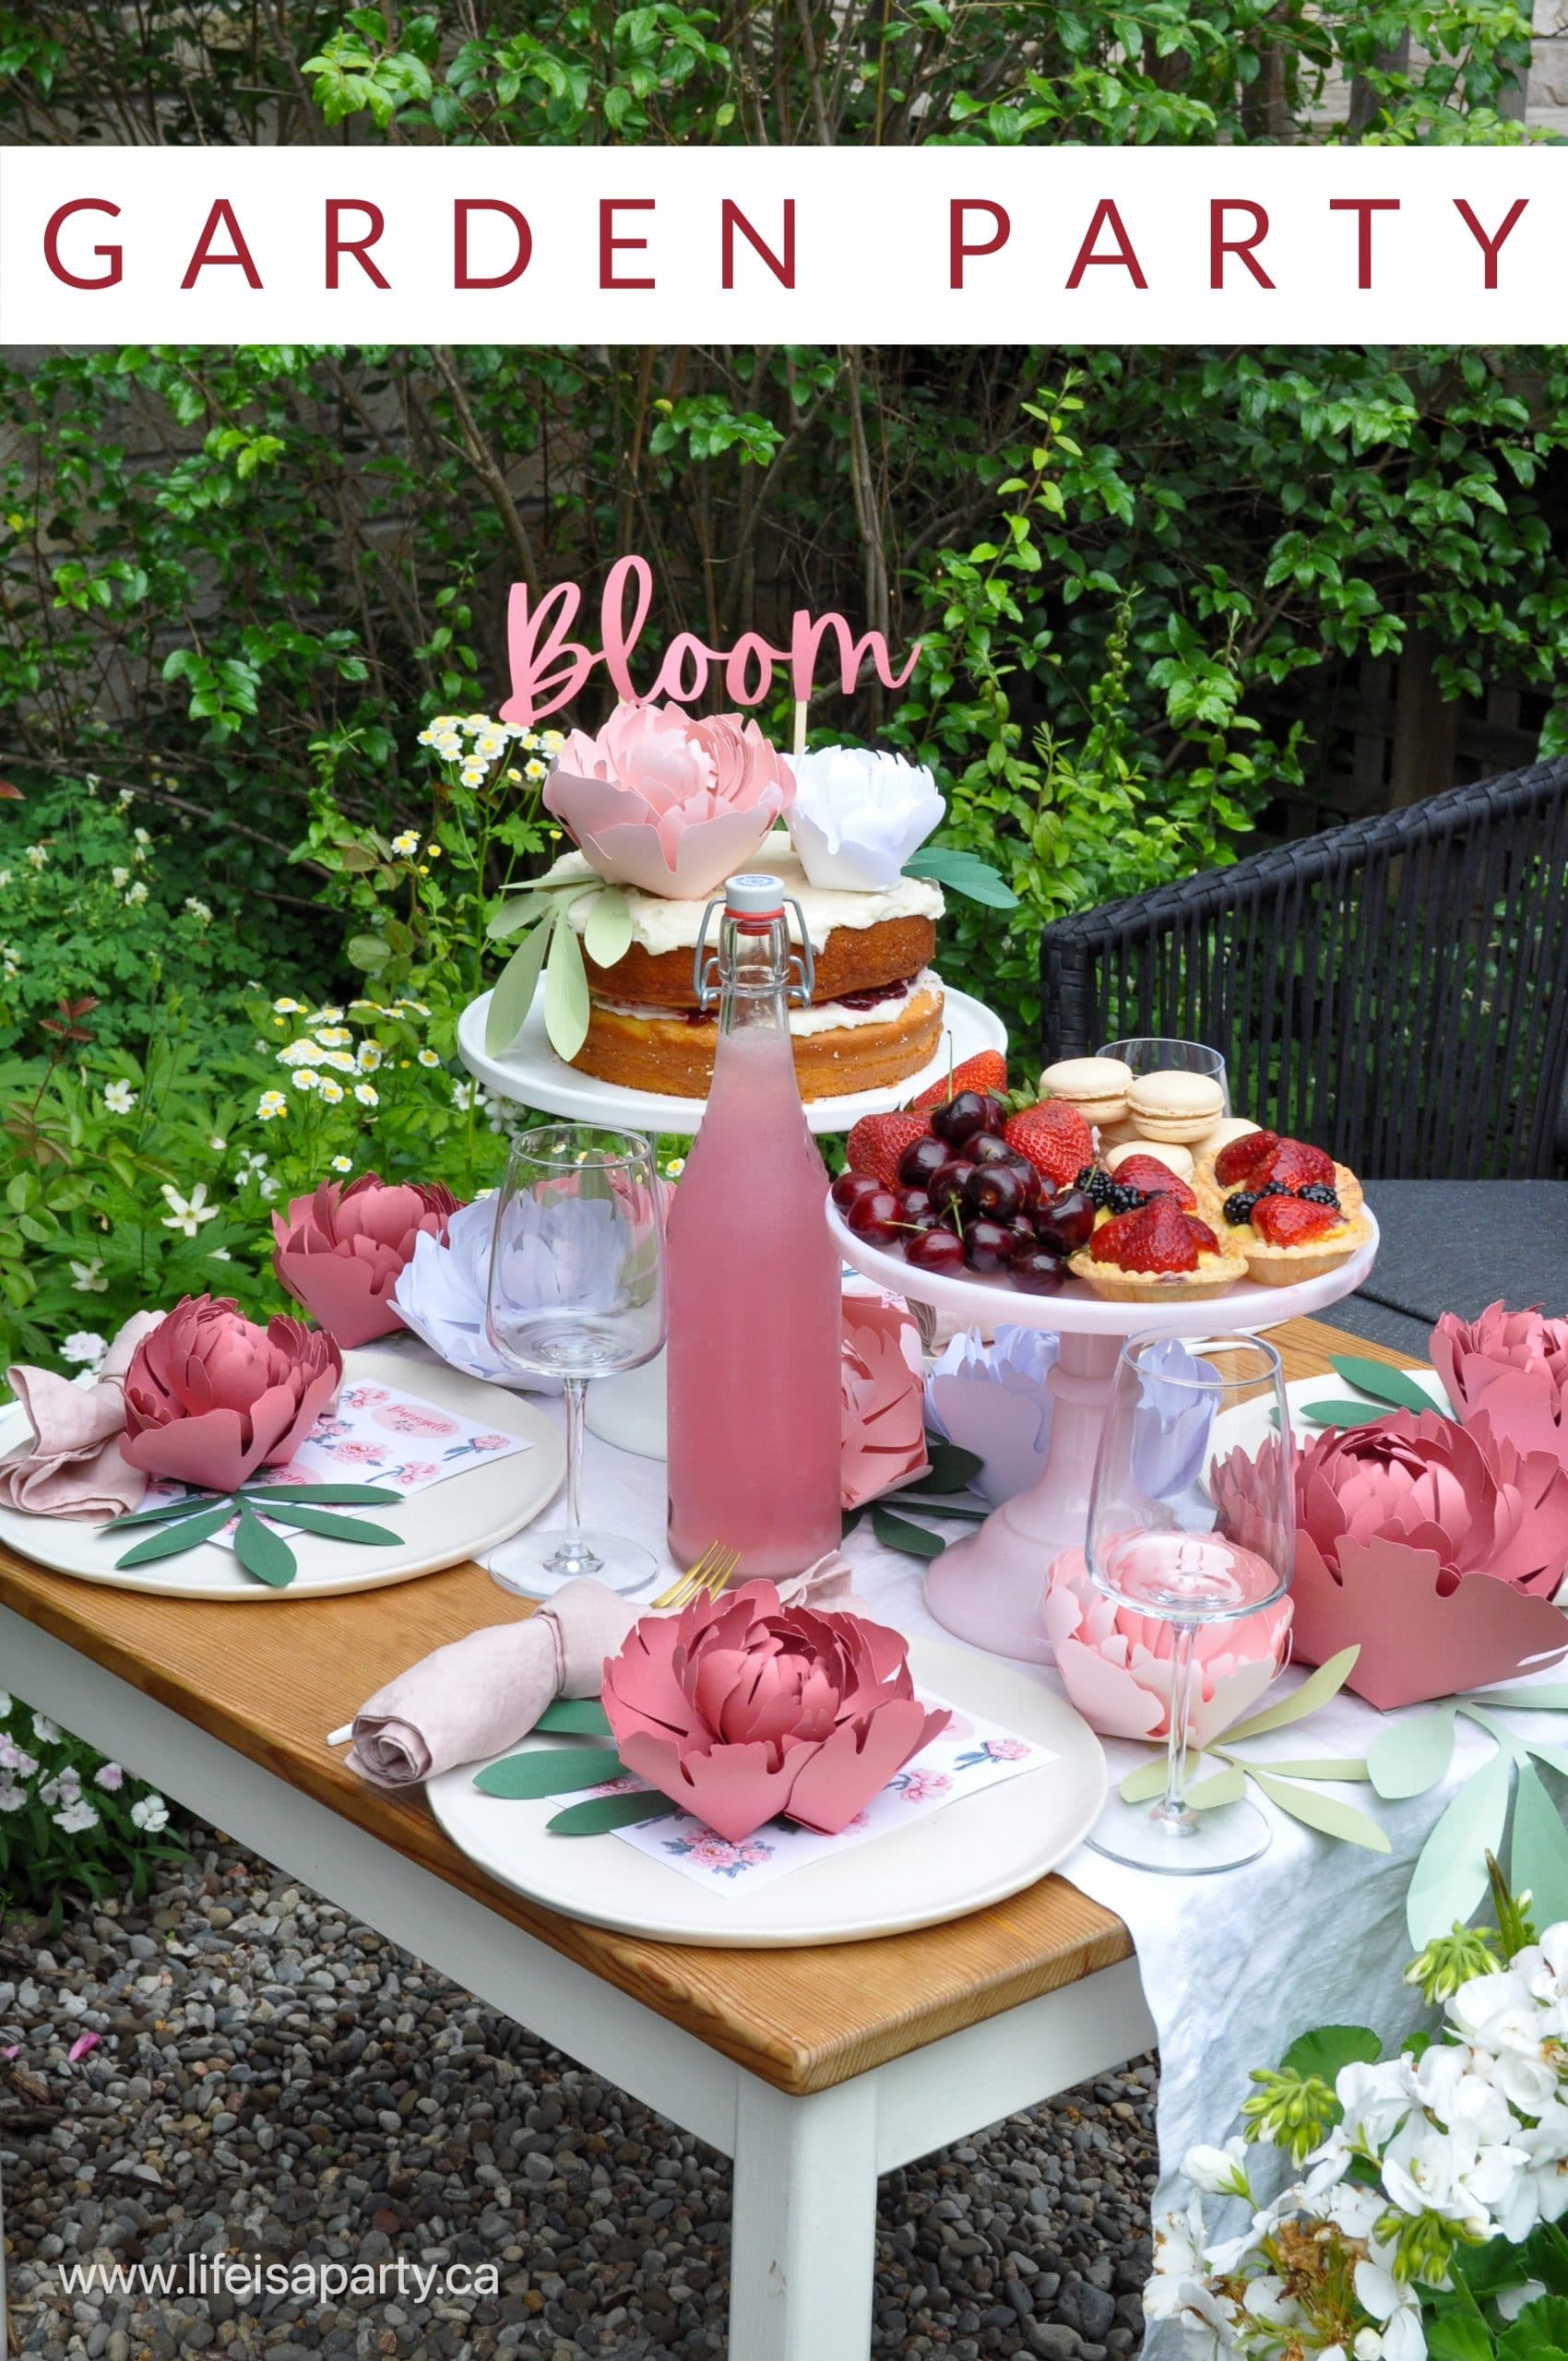 Garden Party: Easy DIY Cricut garden party decor, with custom stickers, paper flower peonies, and a DIY cake topper.